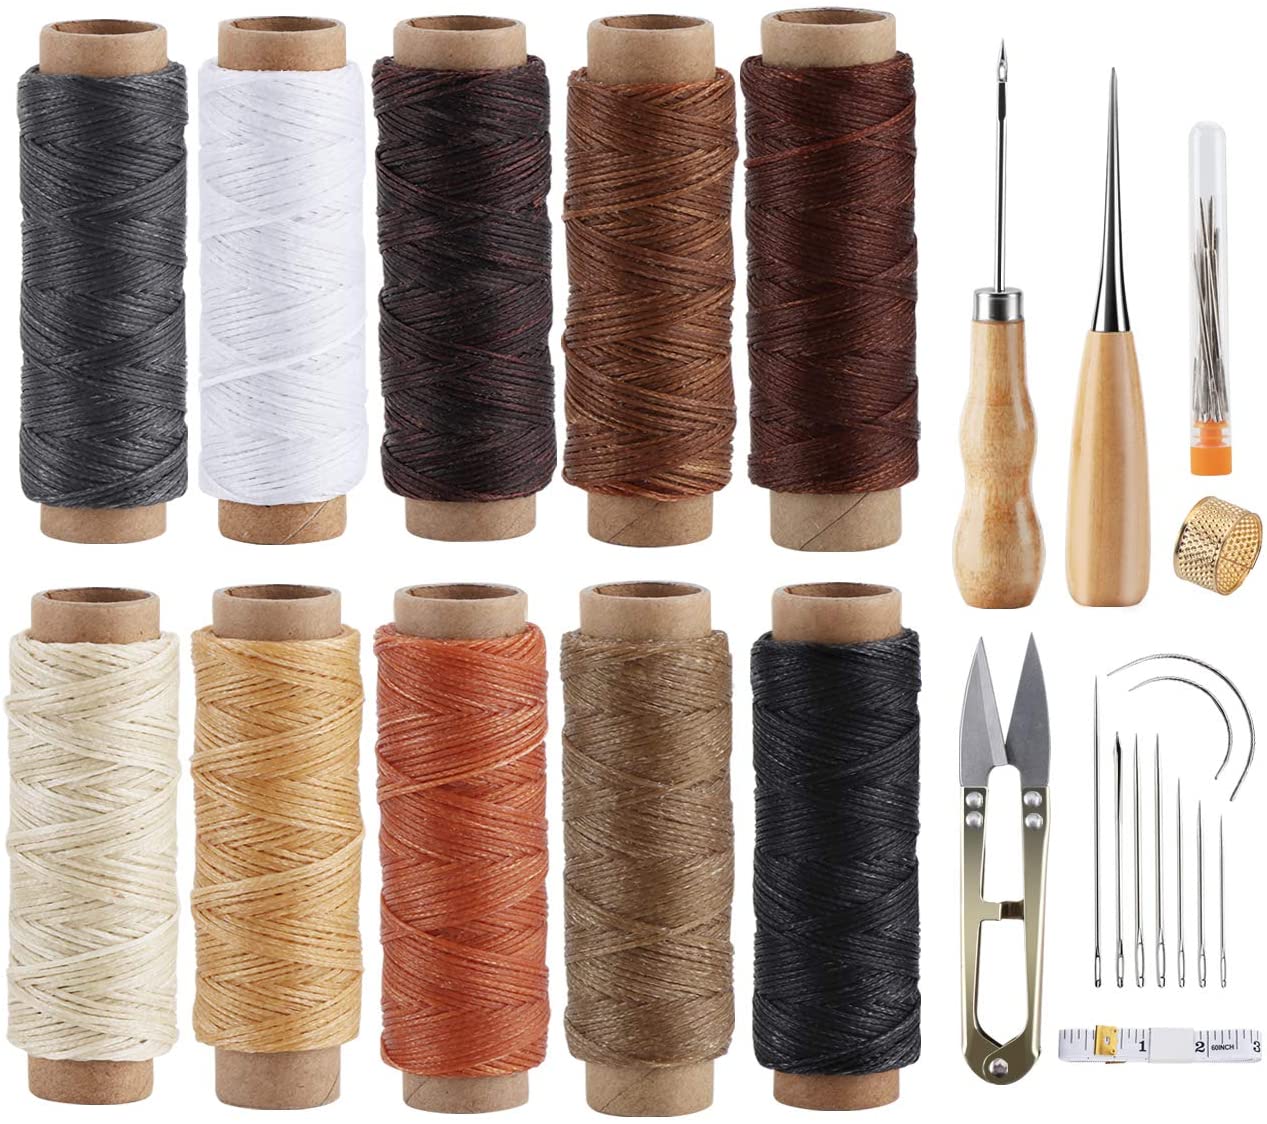 273 Yards Leather Waxed Thread Sewing Kit Including Black Sewing Thread Needle Awl Thimble, Leather Sewing Upholstery Repair Kit for Leather Carpet